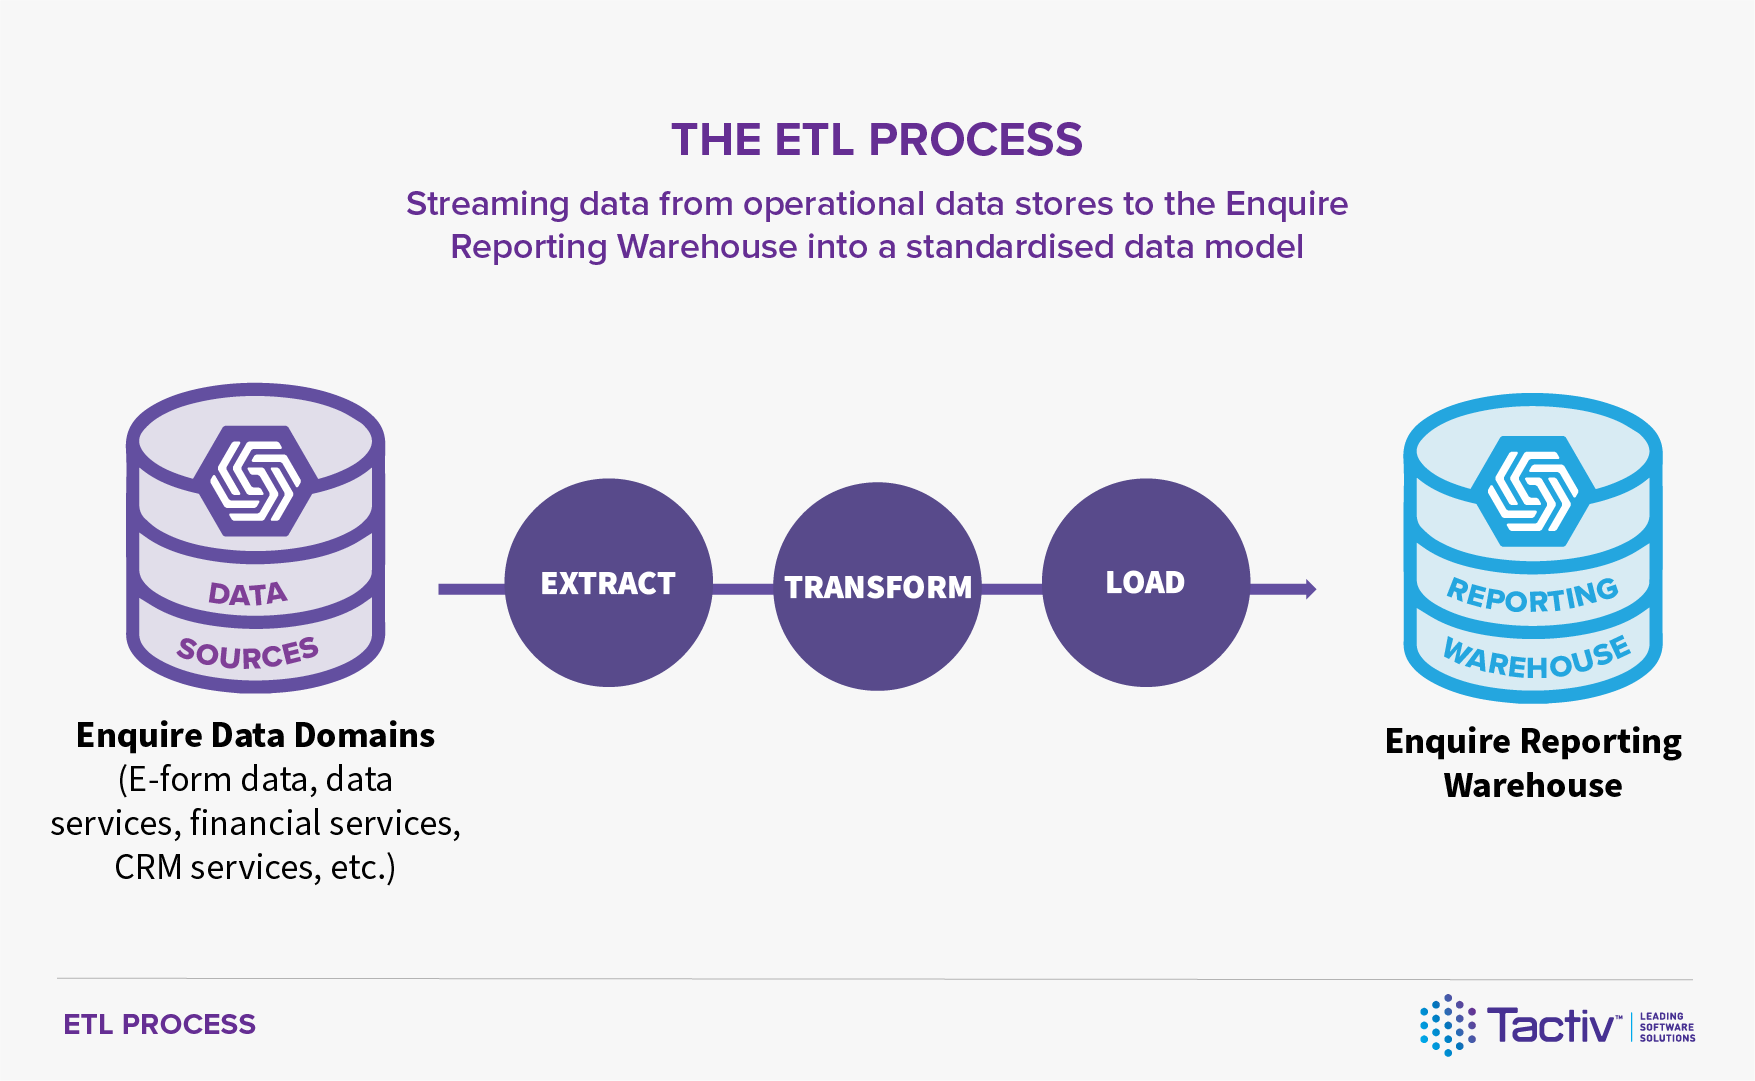 The Enquire Reporting Warehouse utilises a extract, transform, load process to stream data from Enquire to the Reporting Warehouse dynamically.